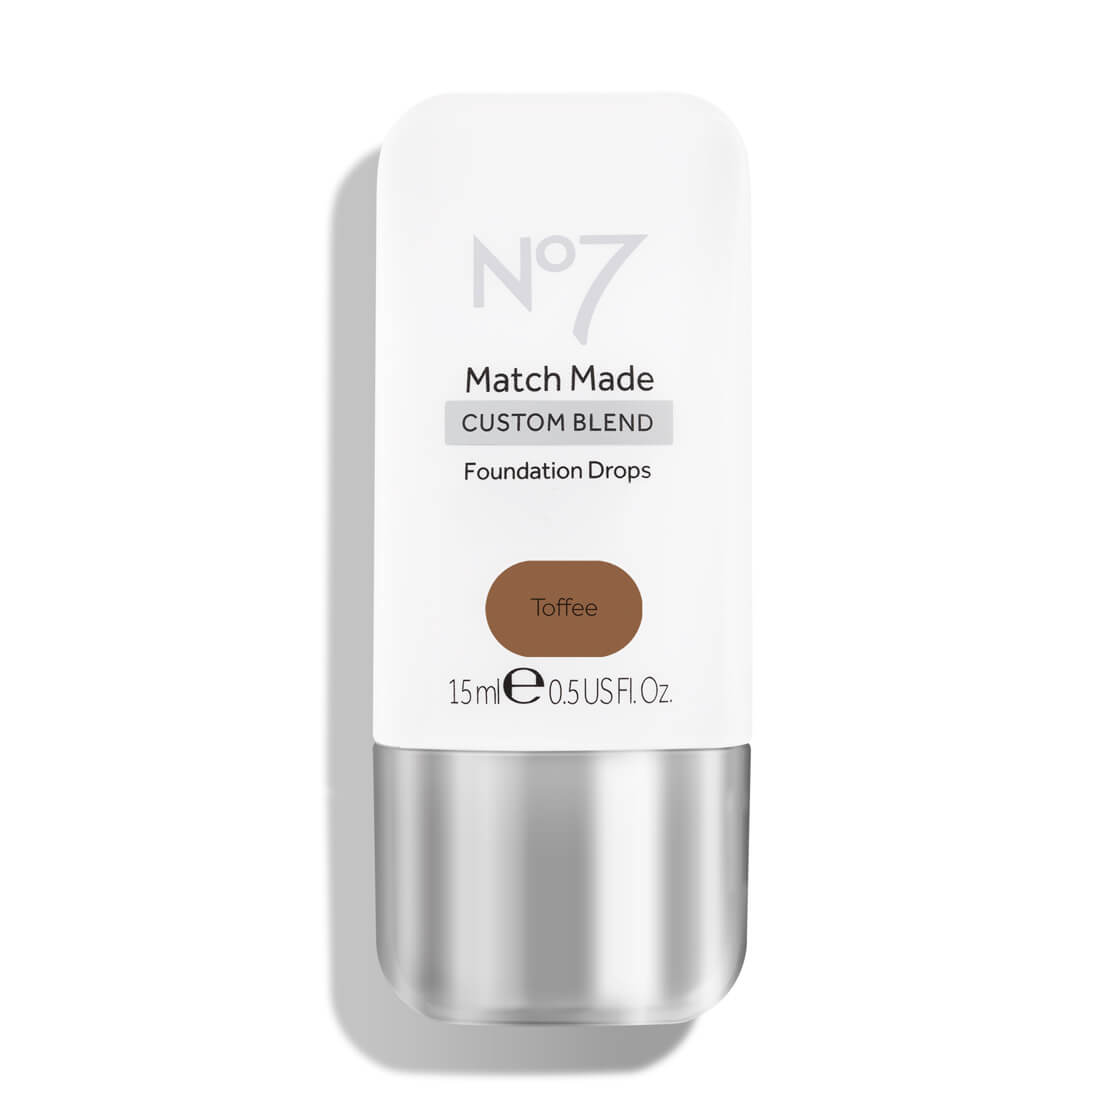 Match Made Foundation Drops (Various Shades) - 22 Toffee